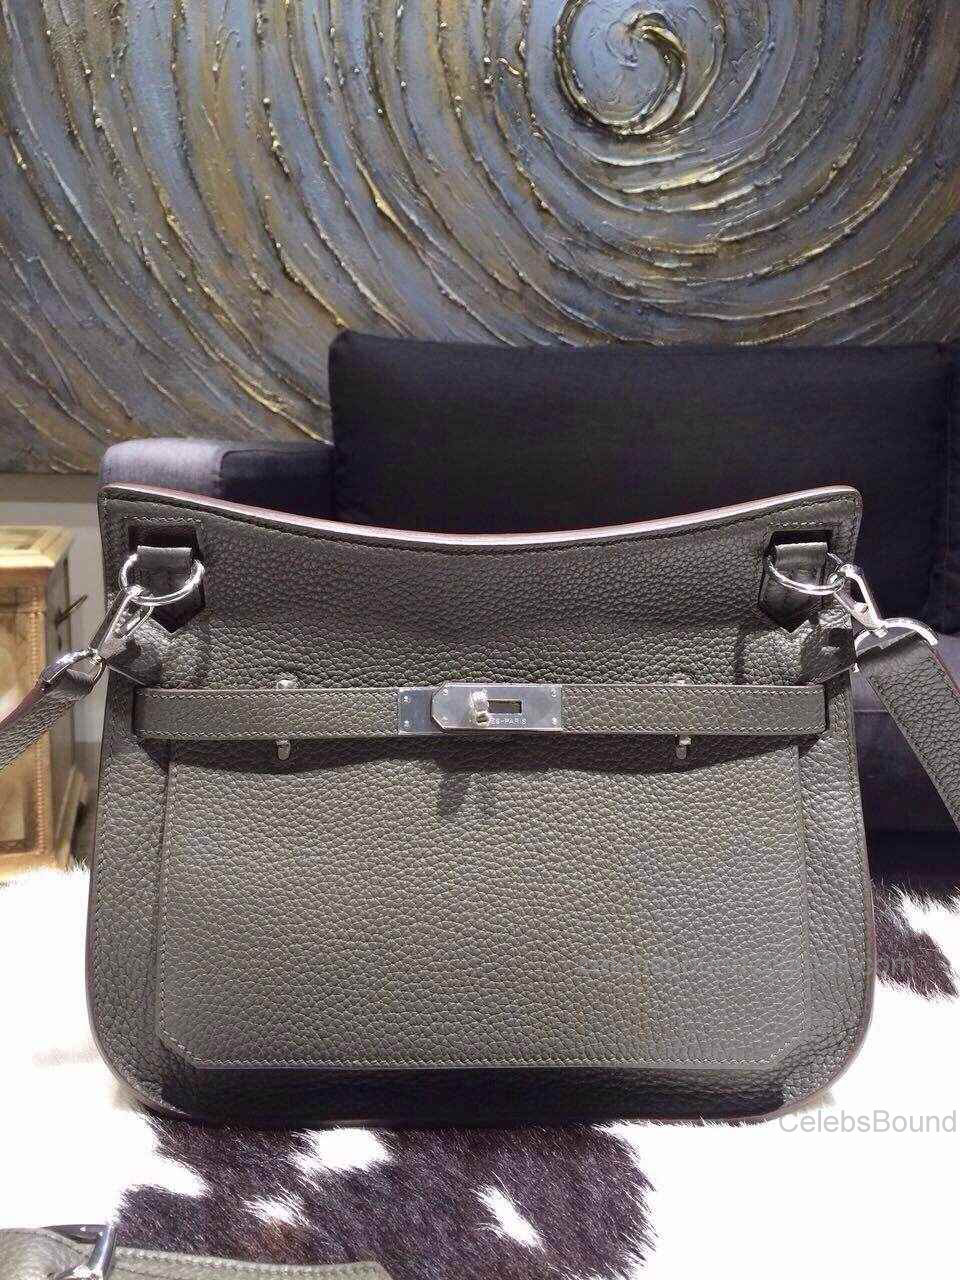 Hermes Jypsiere 34 Large Bag Iron Gray Taurillon Clemence Handstitched